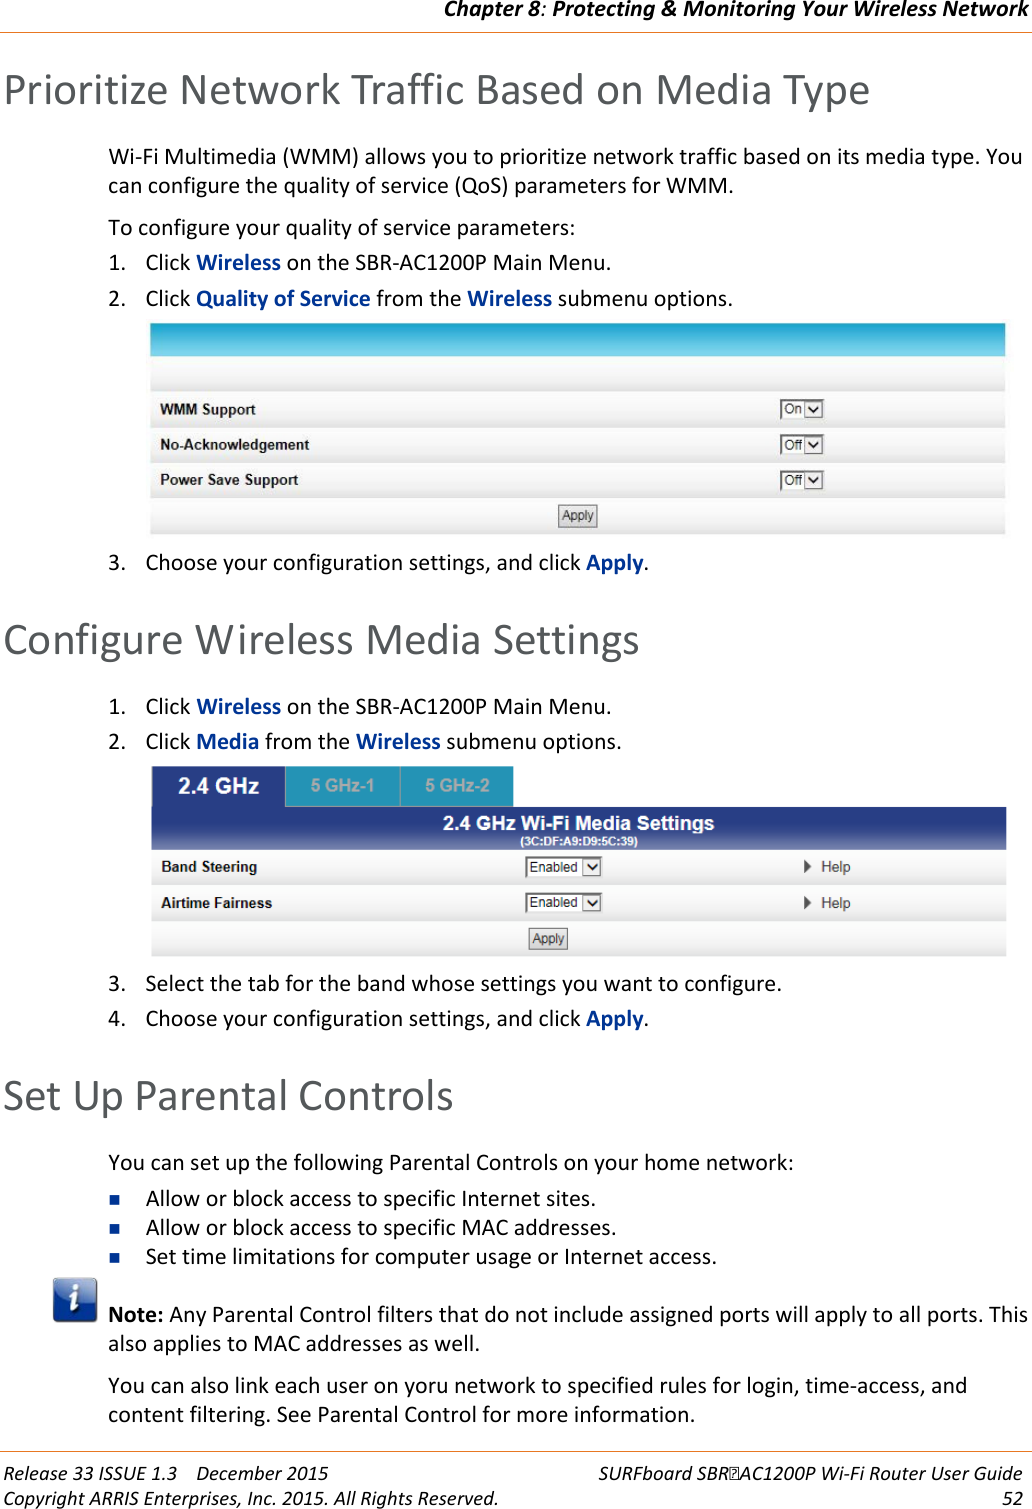 Chapter 8: Protecting &amp; Monitoring Your Wireless Network  Release 33 ISSUE 1.3    December 2015 SURFboard SBRAC1200P Wi-Fi Router User Guide Copyright ARRIS Enterprises, Inc. 2015. All Rights Reserved. 52  Prioritize Network Traffic Based on Media Type Wi-Fi Multimedia (WMM) allows you to prioritize network traffic based on its media type. You can configure the quality of service (QoS) parameters for WMM. To configure your quality of service parameters: 1. Click Wireless on the SBR-AC1200P Main Menu. 2. Click Quality of Service from the Wireless submenu options.  3. Choose your configuration settings, and click Apply.   Configure Wireless Media Settings 1. Click Wireless on the SBR-AC1200P Main Menu. 2. Click Media from the Wireless submenu options.  3. Select the tab for the band whose settings you want to configure. 4. Choose your configuration settings, and click Apply.   Set Up Parental Controls You can set up the following Parental Controls on your home network:  Allow or block access to specific Internet sites.  Allow or block access to specific MAC addresses.  Set time limitations for computer usage or Internet access.  Note: Any Parental Control filters that do not include assigned ports will apply to all ports. This also applies to MAC addresses as well. You can also link each user on yoru network to specified rules for login, time-access, and content filtering. See Parental Control for more information. 